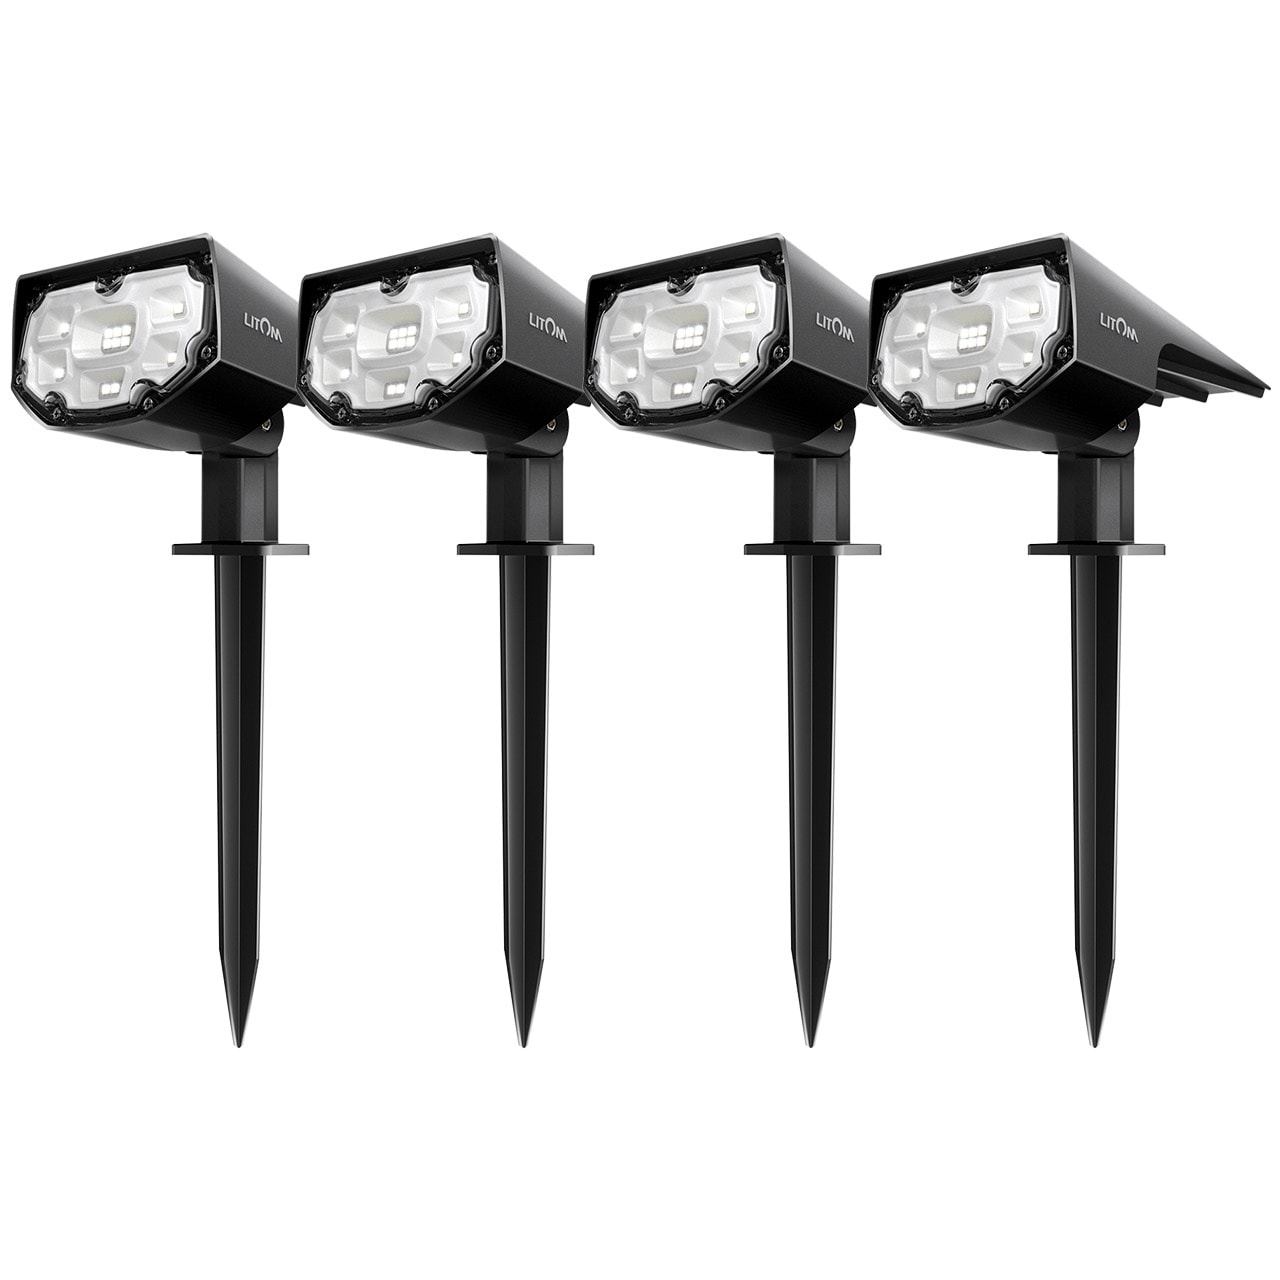 Bright White 2-in-1 Wireless Security Wall Light for Yard Garden Path Driveway Porch Walkway Pool Patio 6-Pack Outdoor Solar Powered Spot Lights JESLED 14 LED Landscape Spotlights IP67 Waterproof